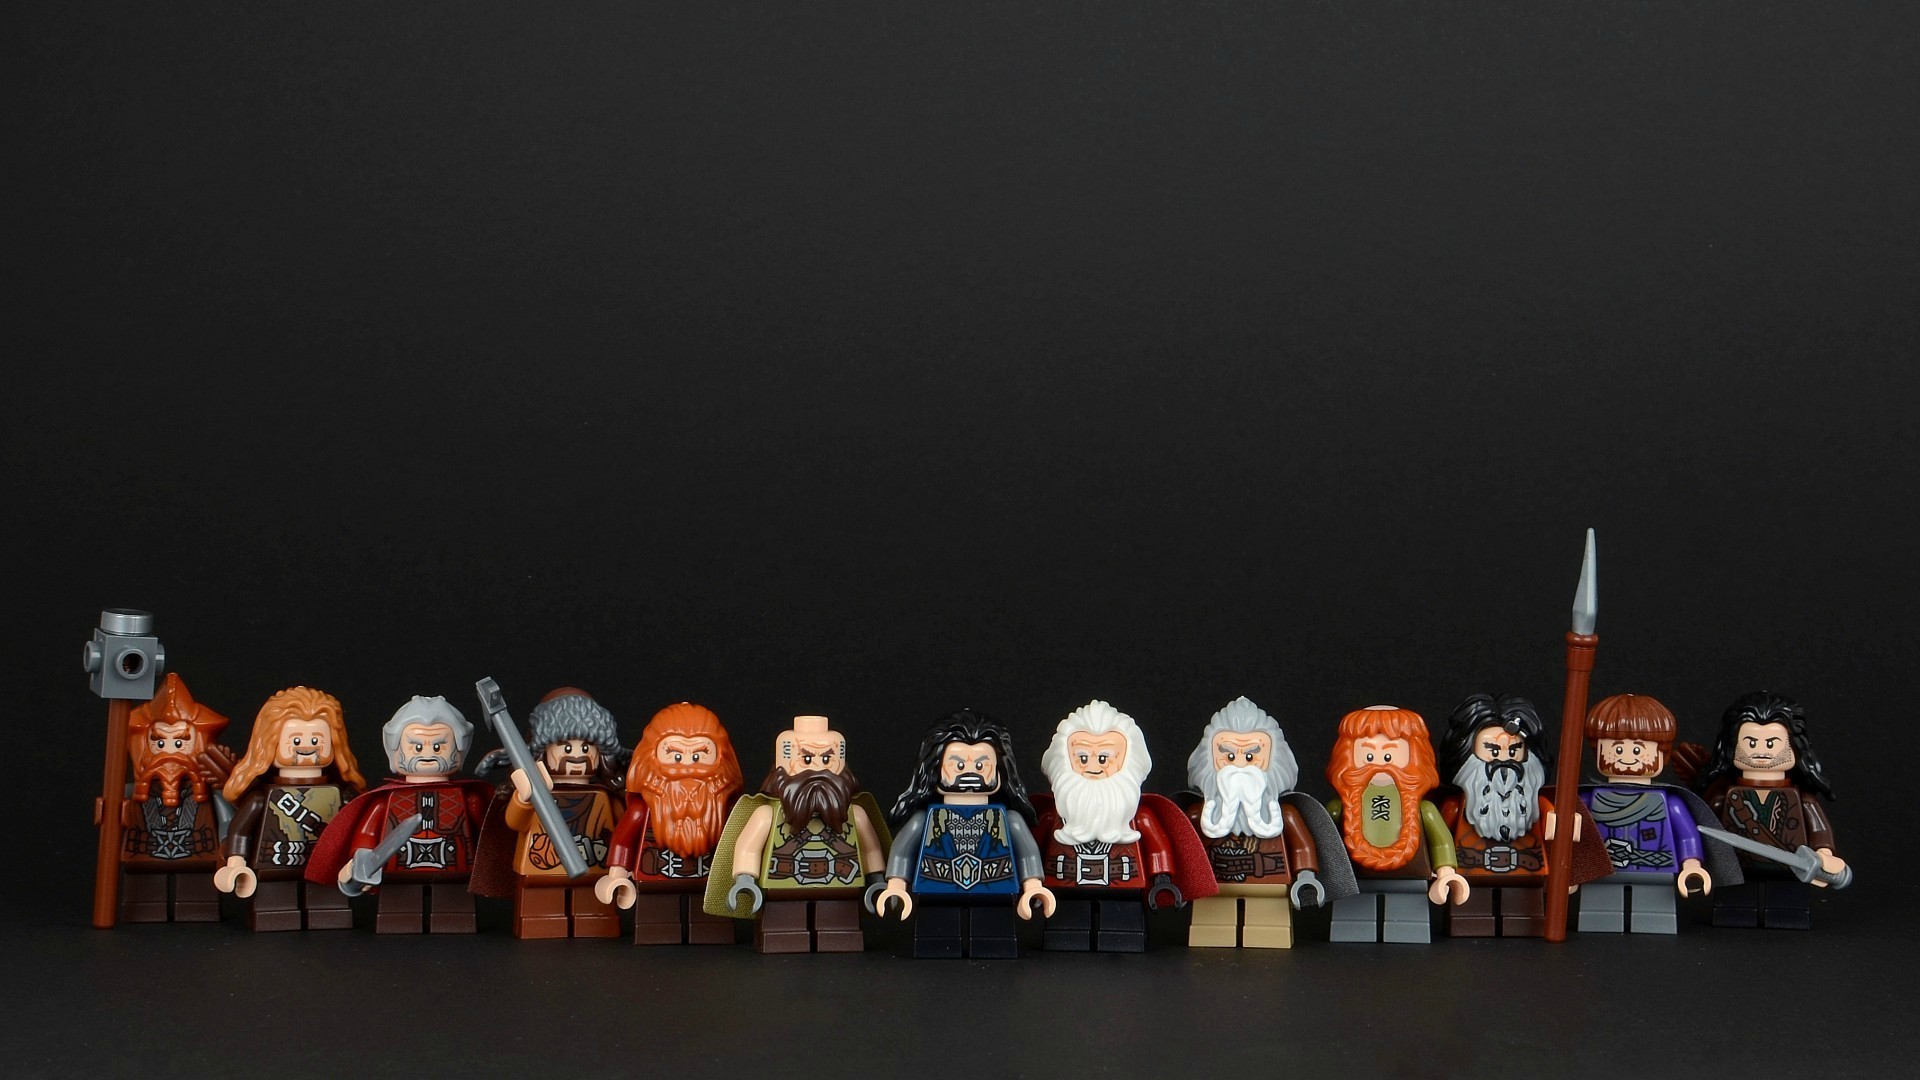 the lord de the rings the hobbit, lego figurines wallpaper 